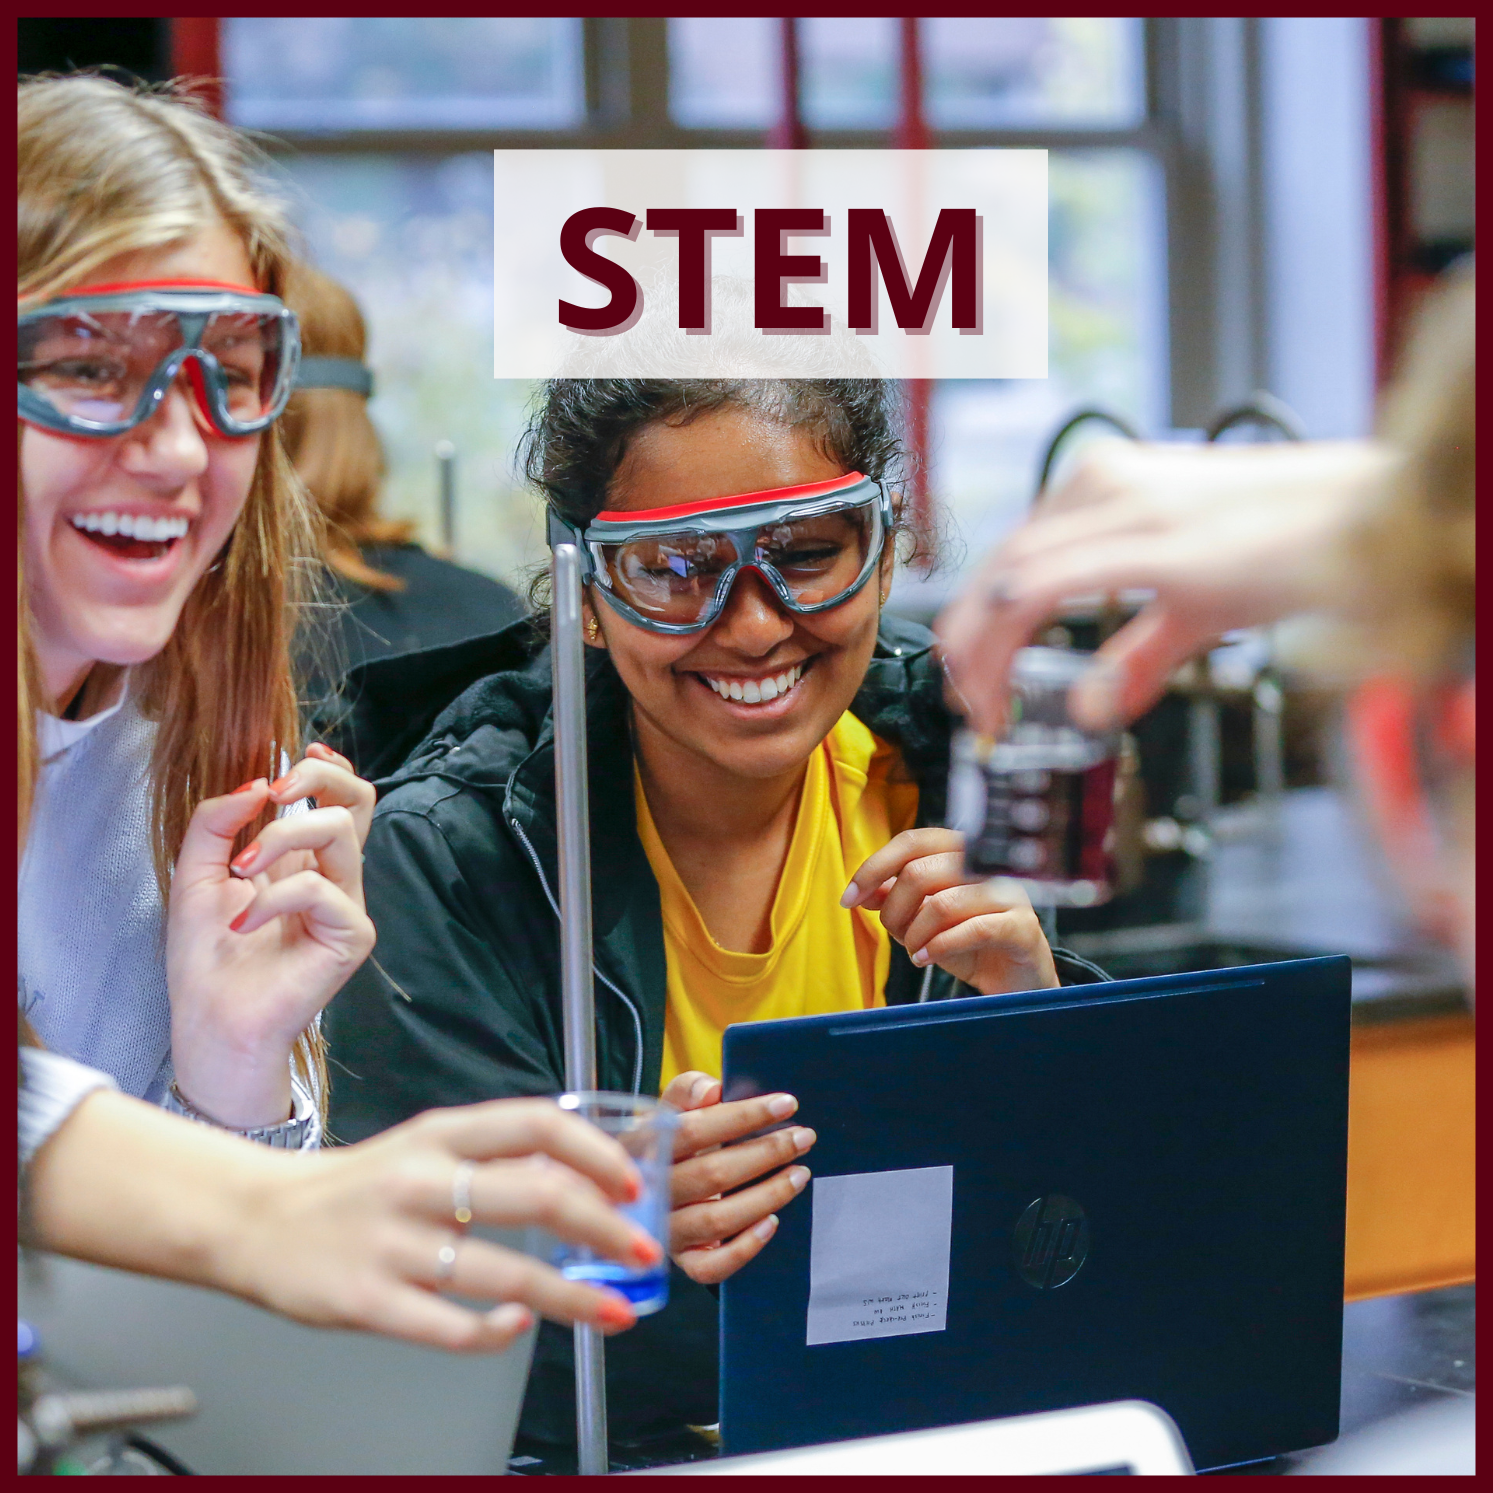 STEM, with a photo of students mixing liquids in a lab